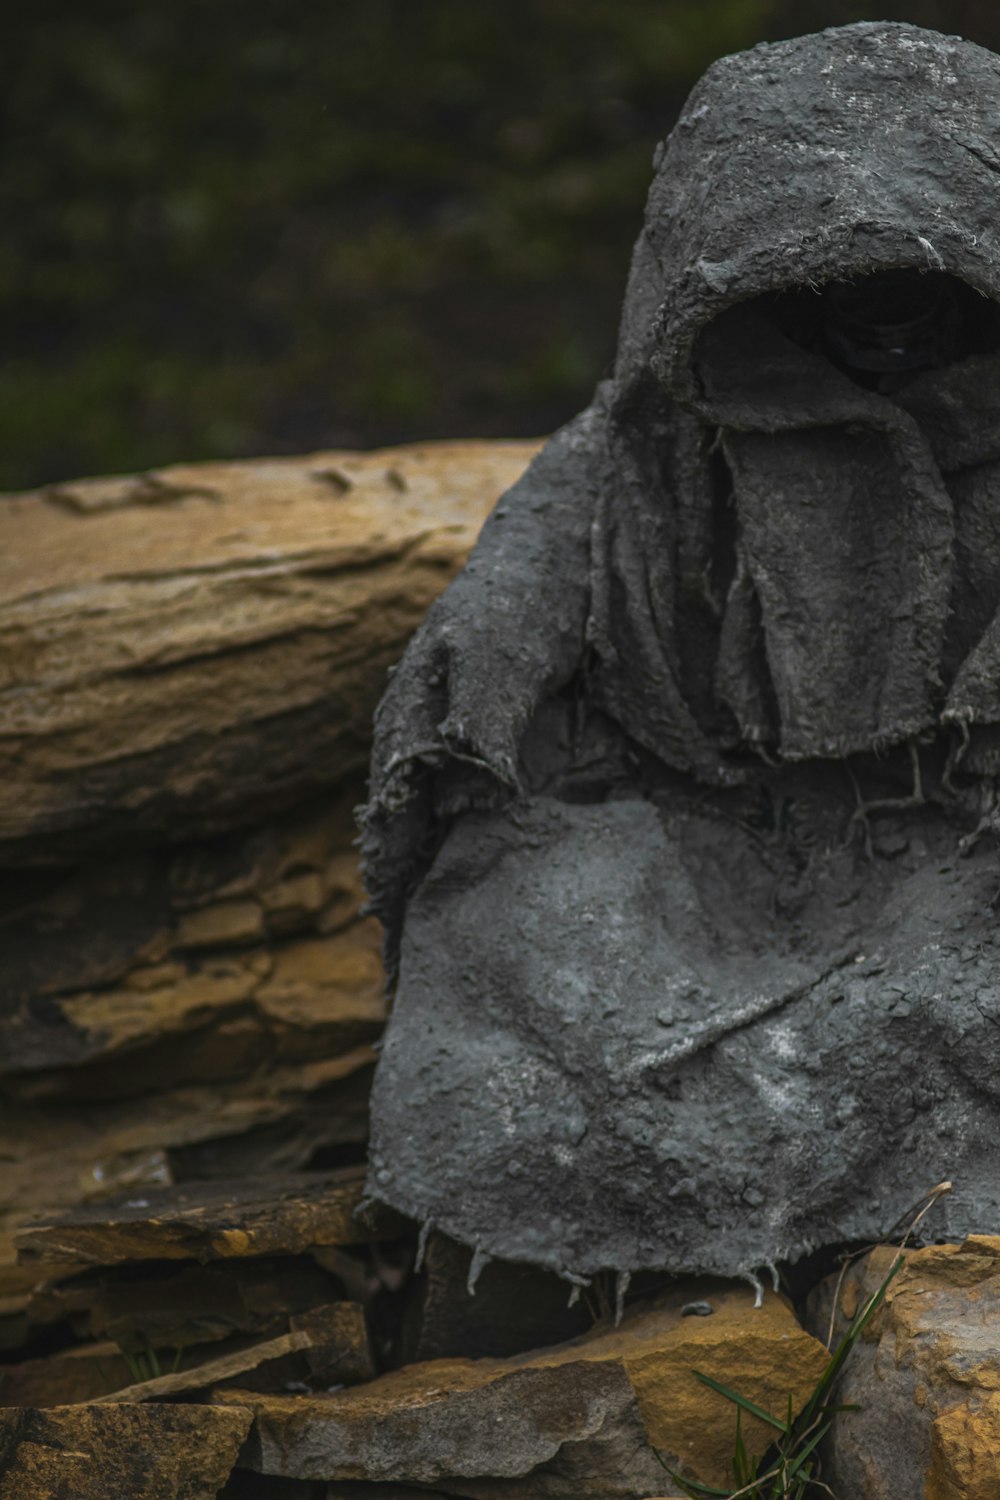 a statue of a person with a hood on sitting on some rocks